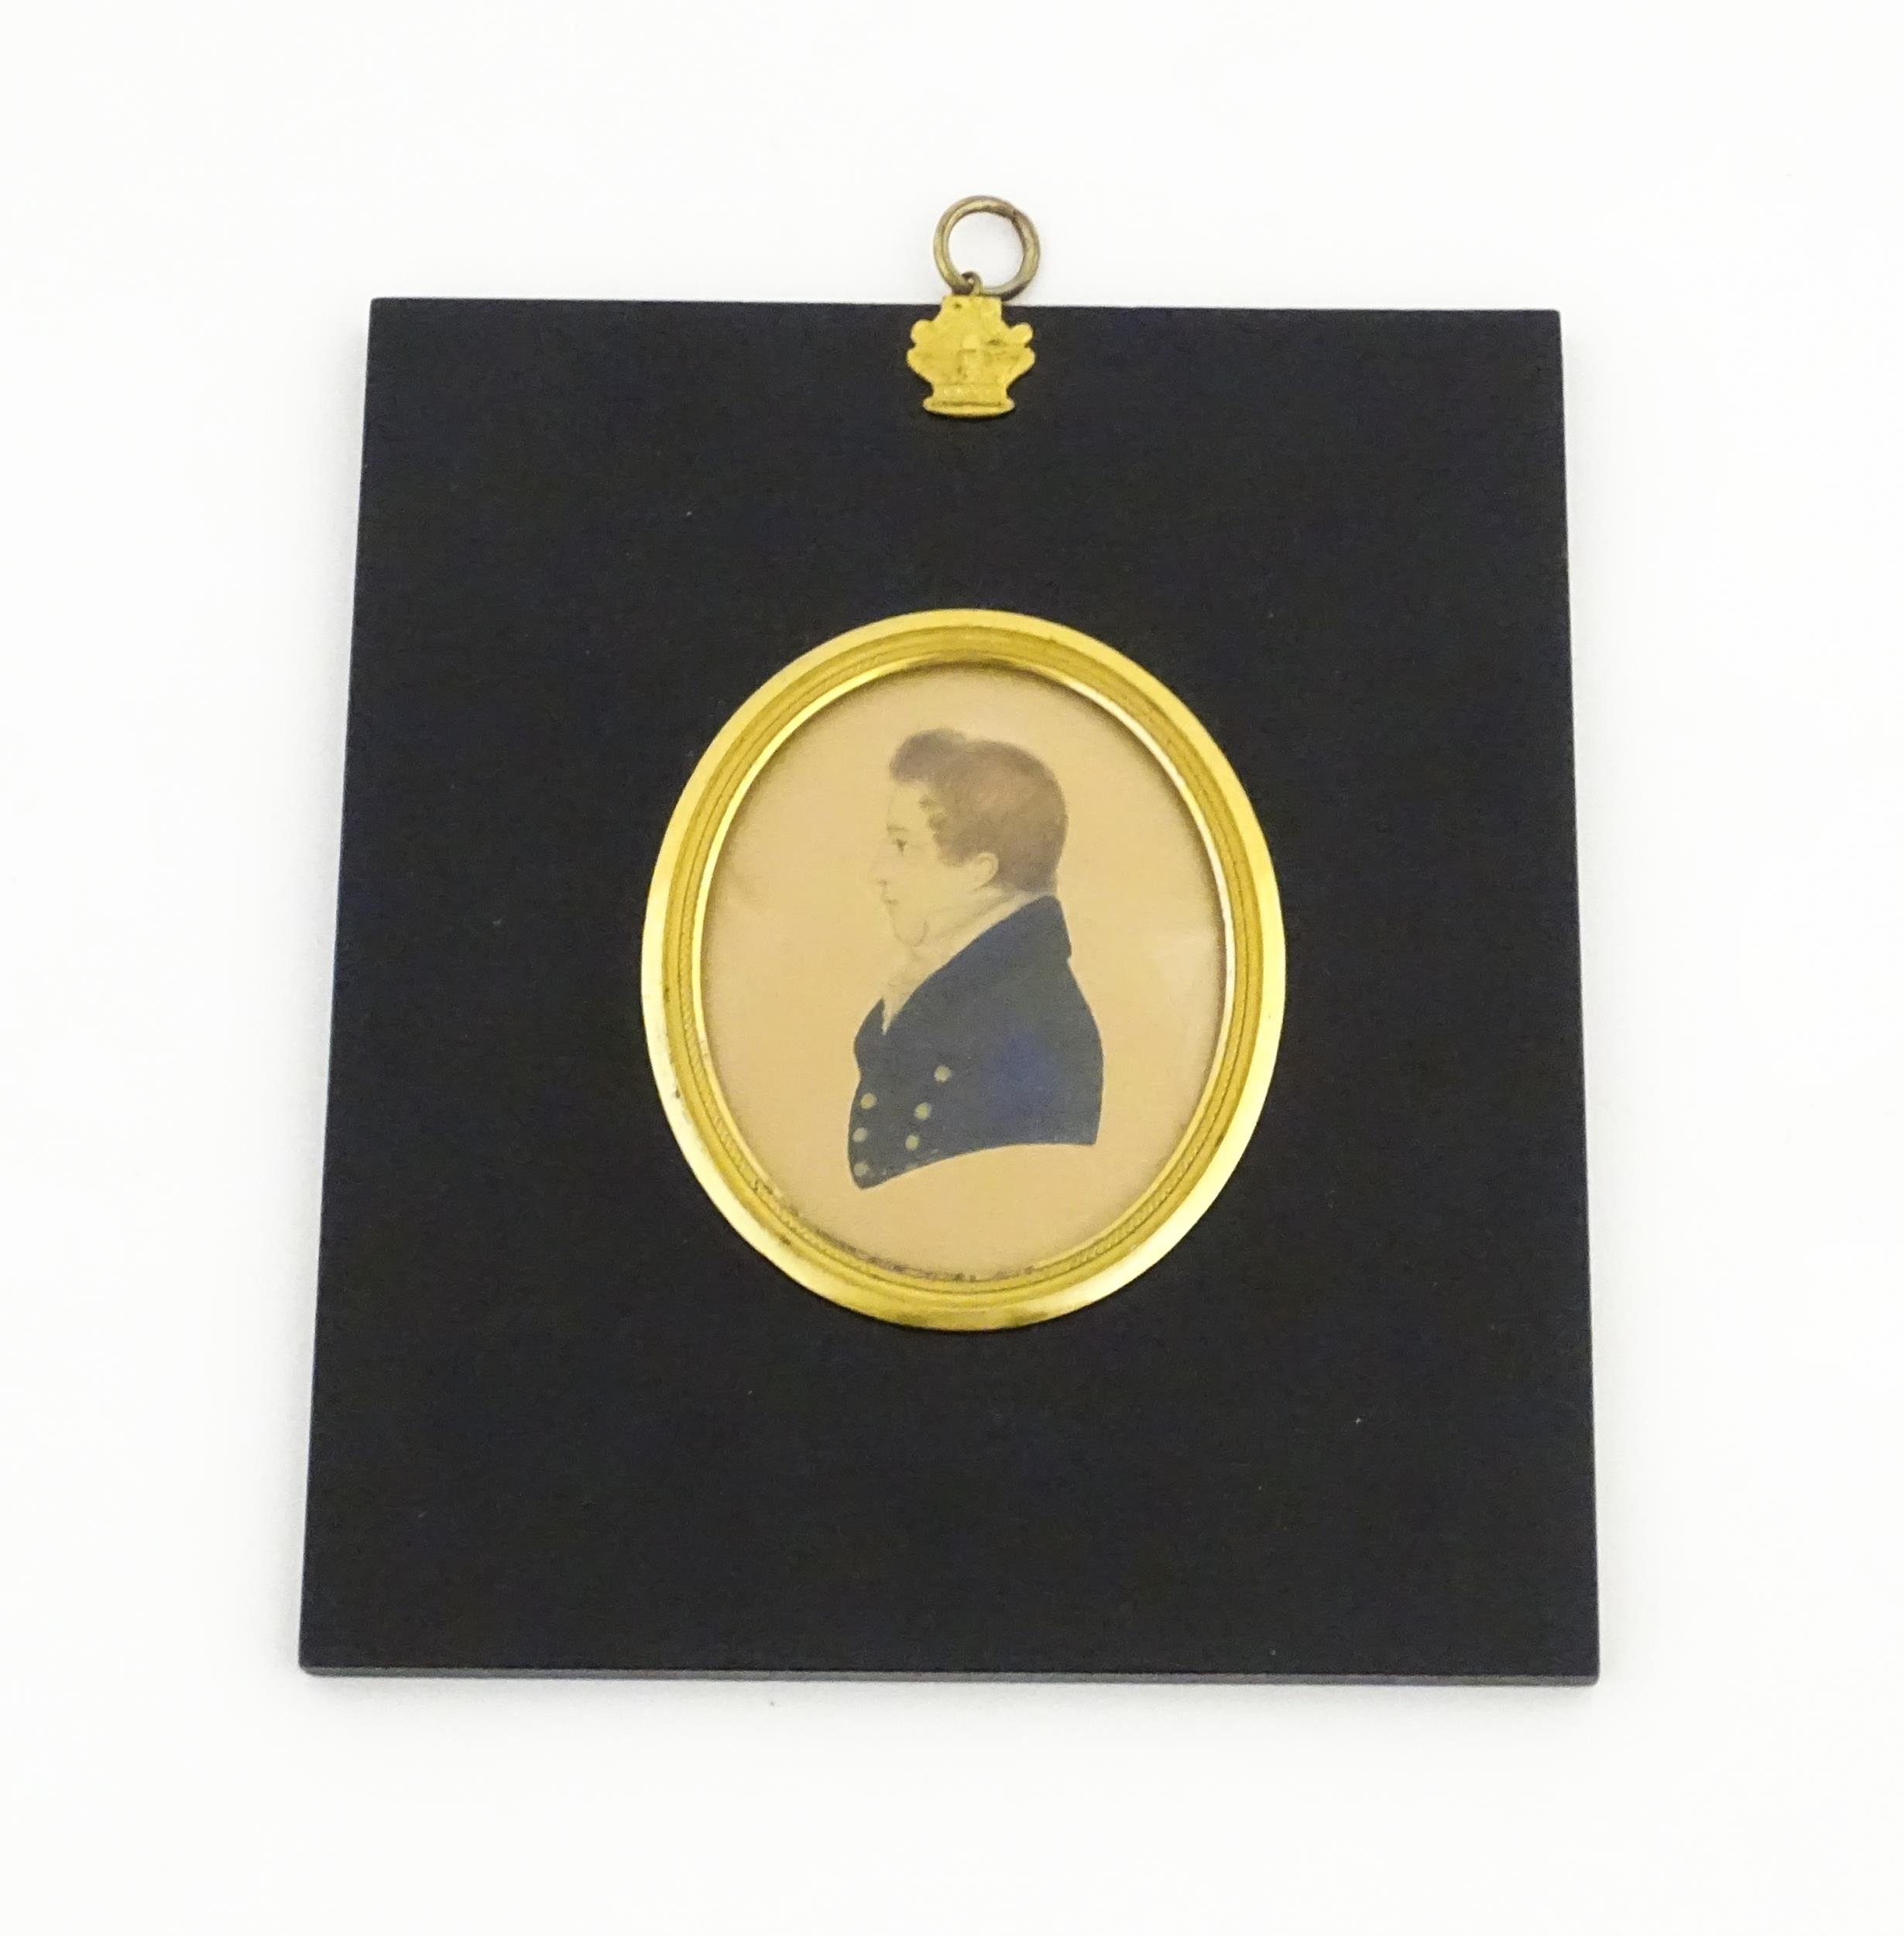 Two 19thC portrait miniature in the manner of Edward Ward Foster, one a silhouette portrait - Image 5 of 8